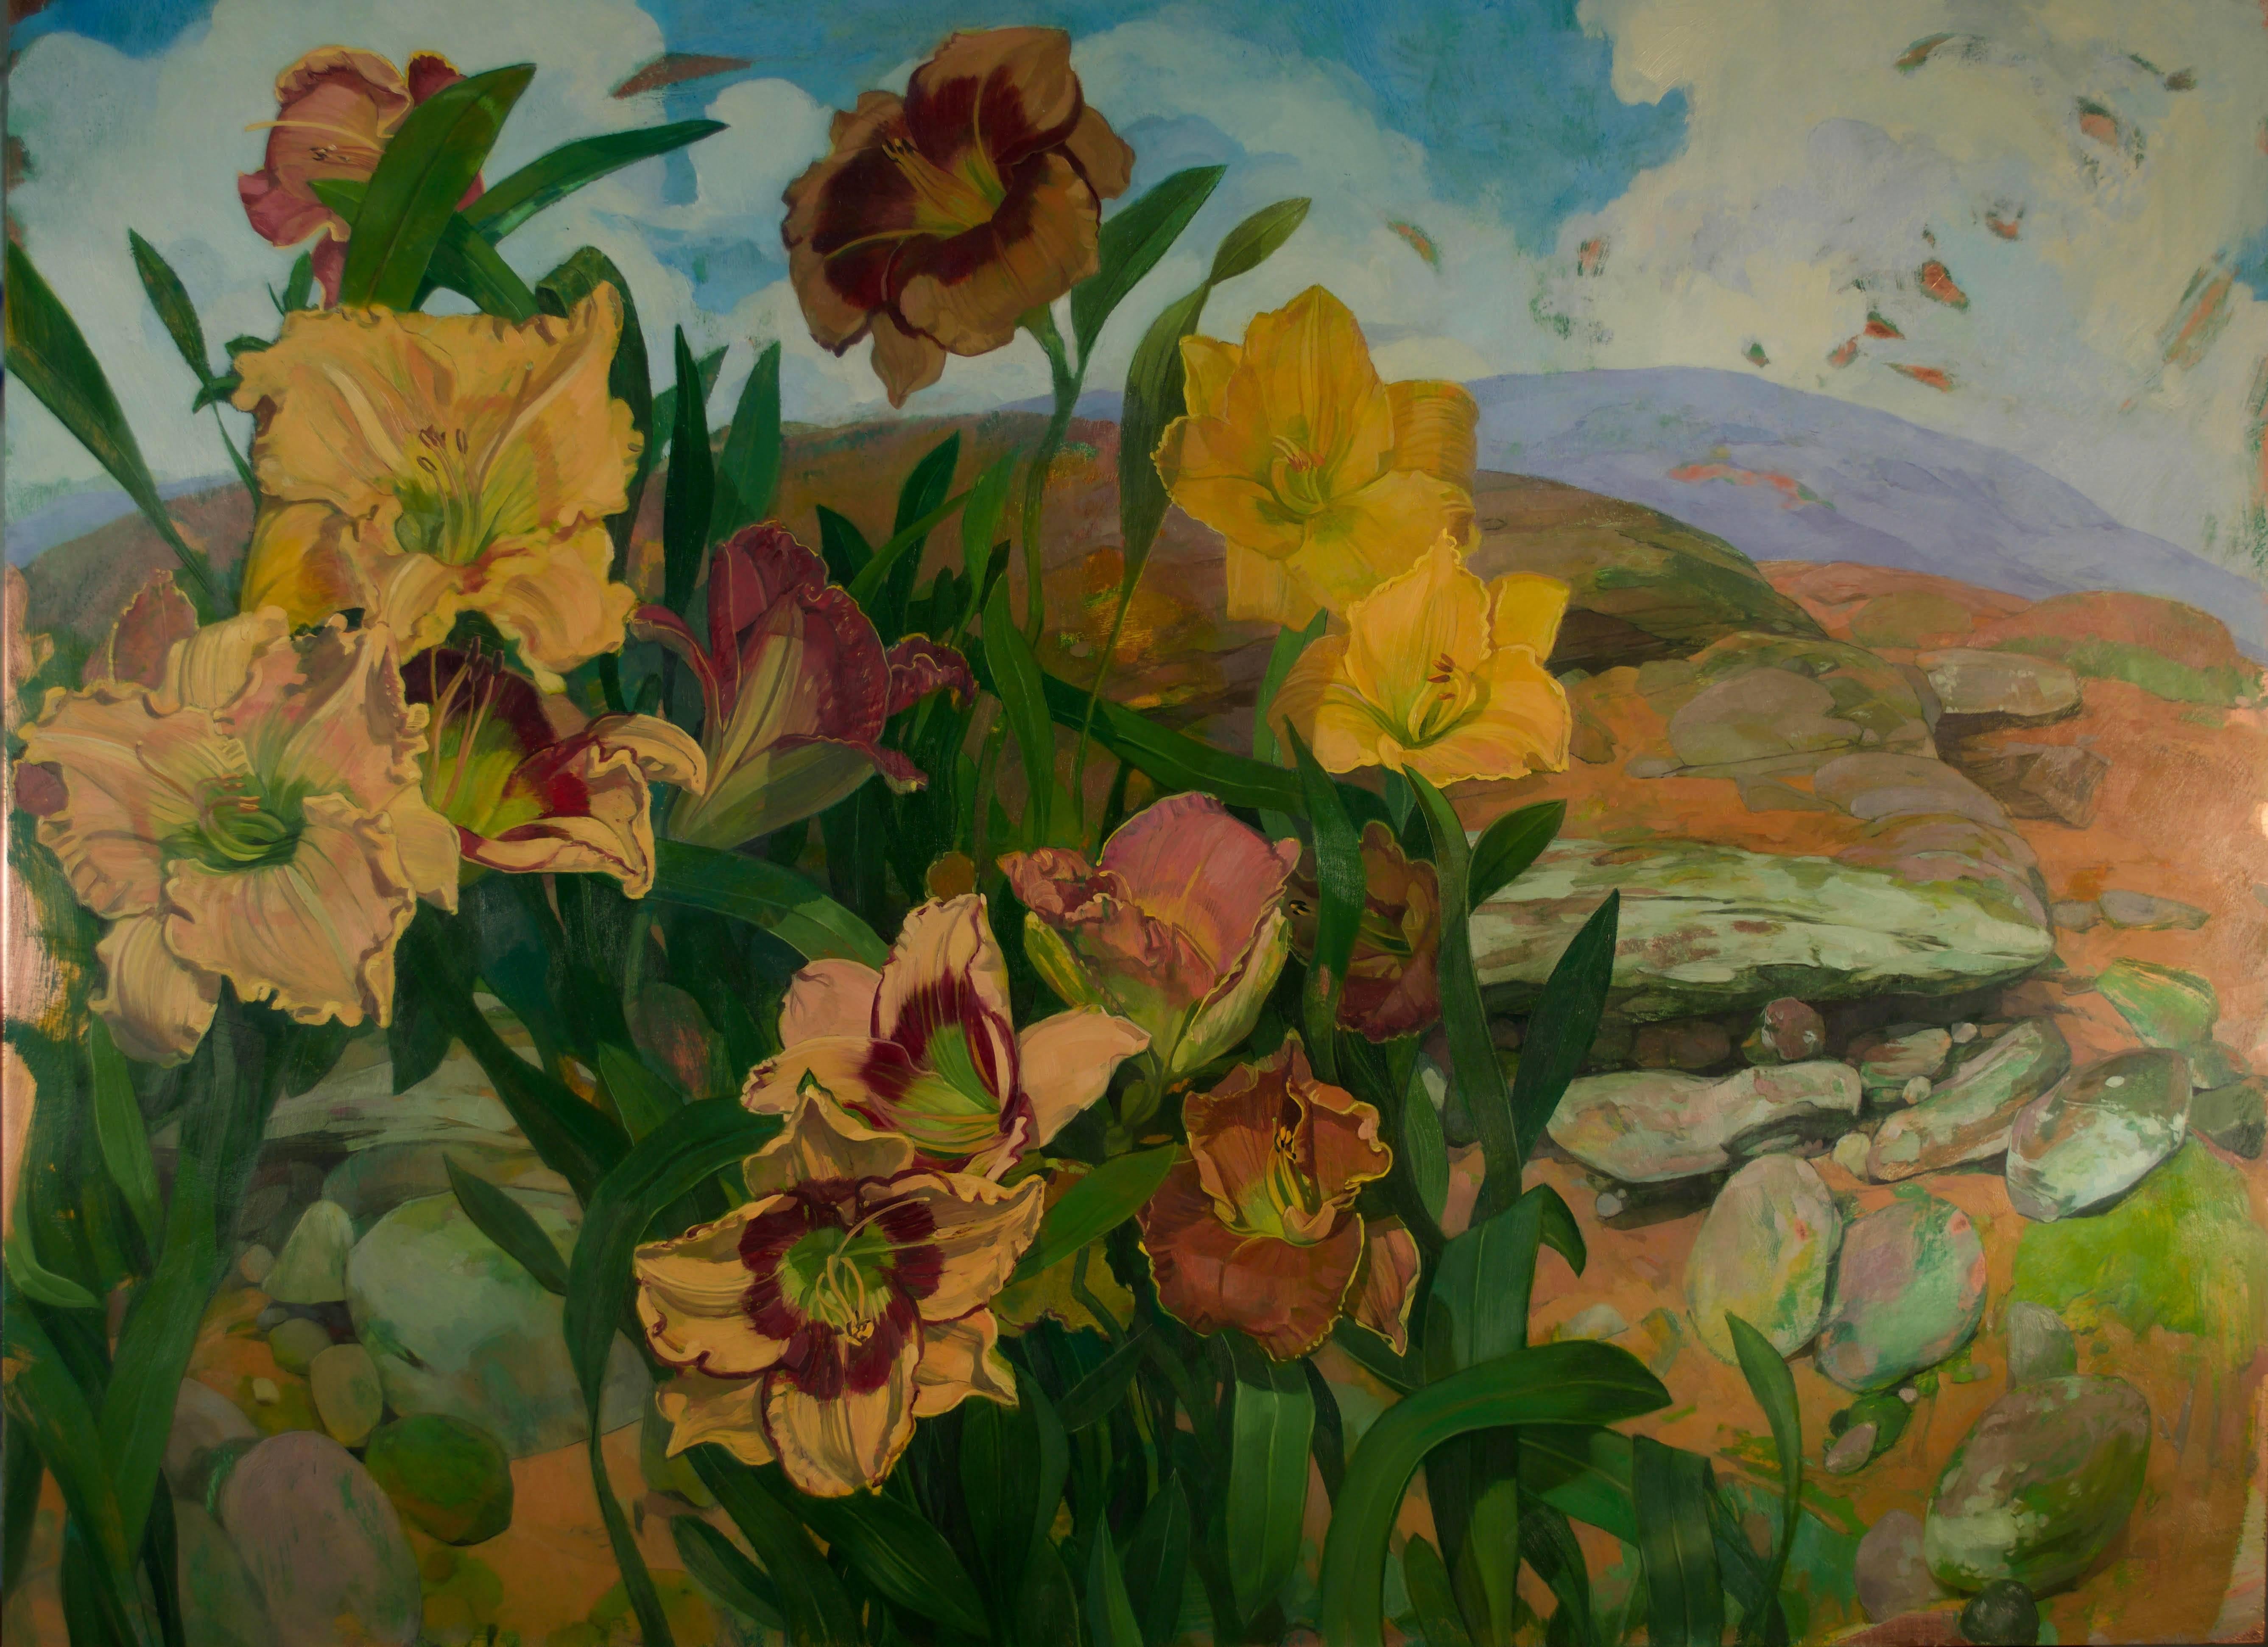 "Day Lilies in Landscape" is an original oil on copper by artist Benjamin Shamback. The painting shows a bunch of day lilies growing in a rocky landscape with a cloudy background. The work is mainly tones of yellows and orange with some cool blues